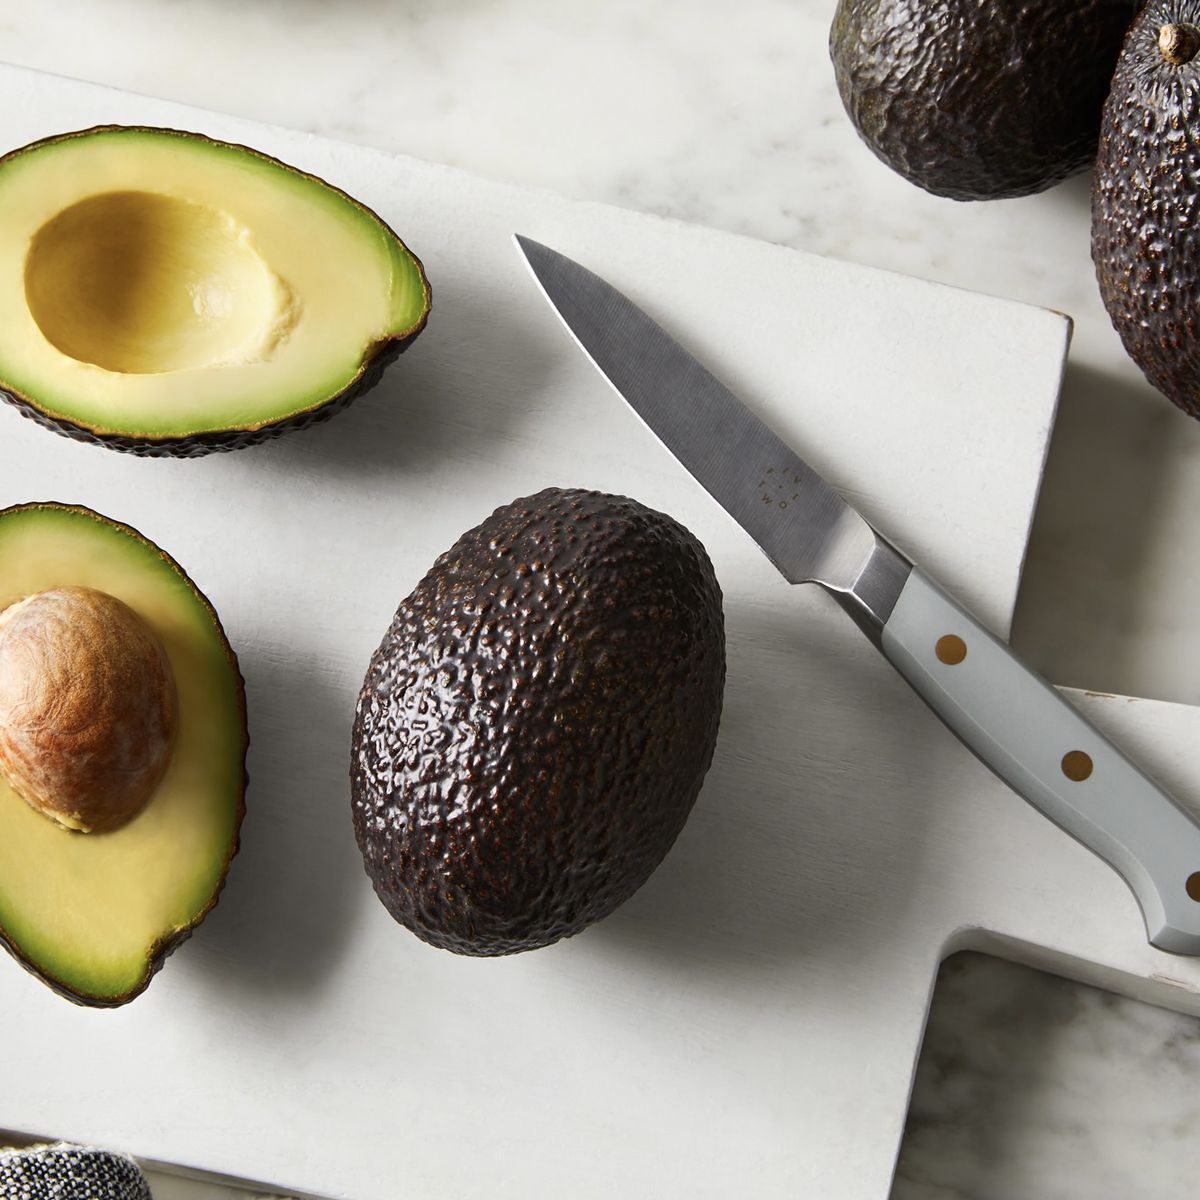 How To Store Cut Avocados In The Refrigerator